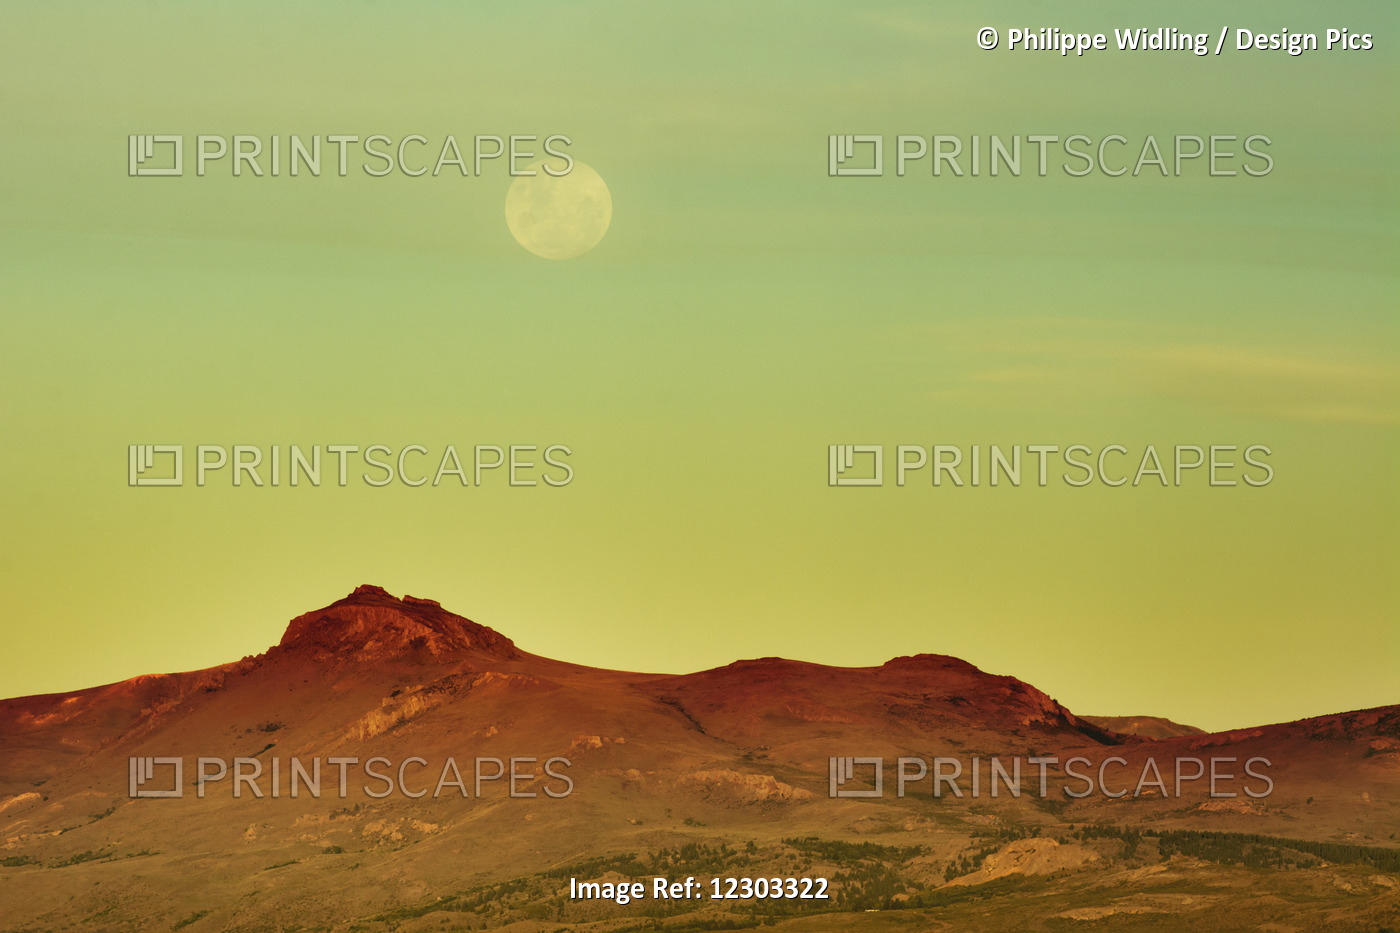 The Moon Is Rising Over A Yellow Desert Landscape; Bariloche, Argentina